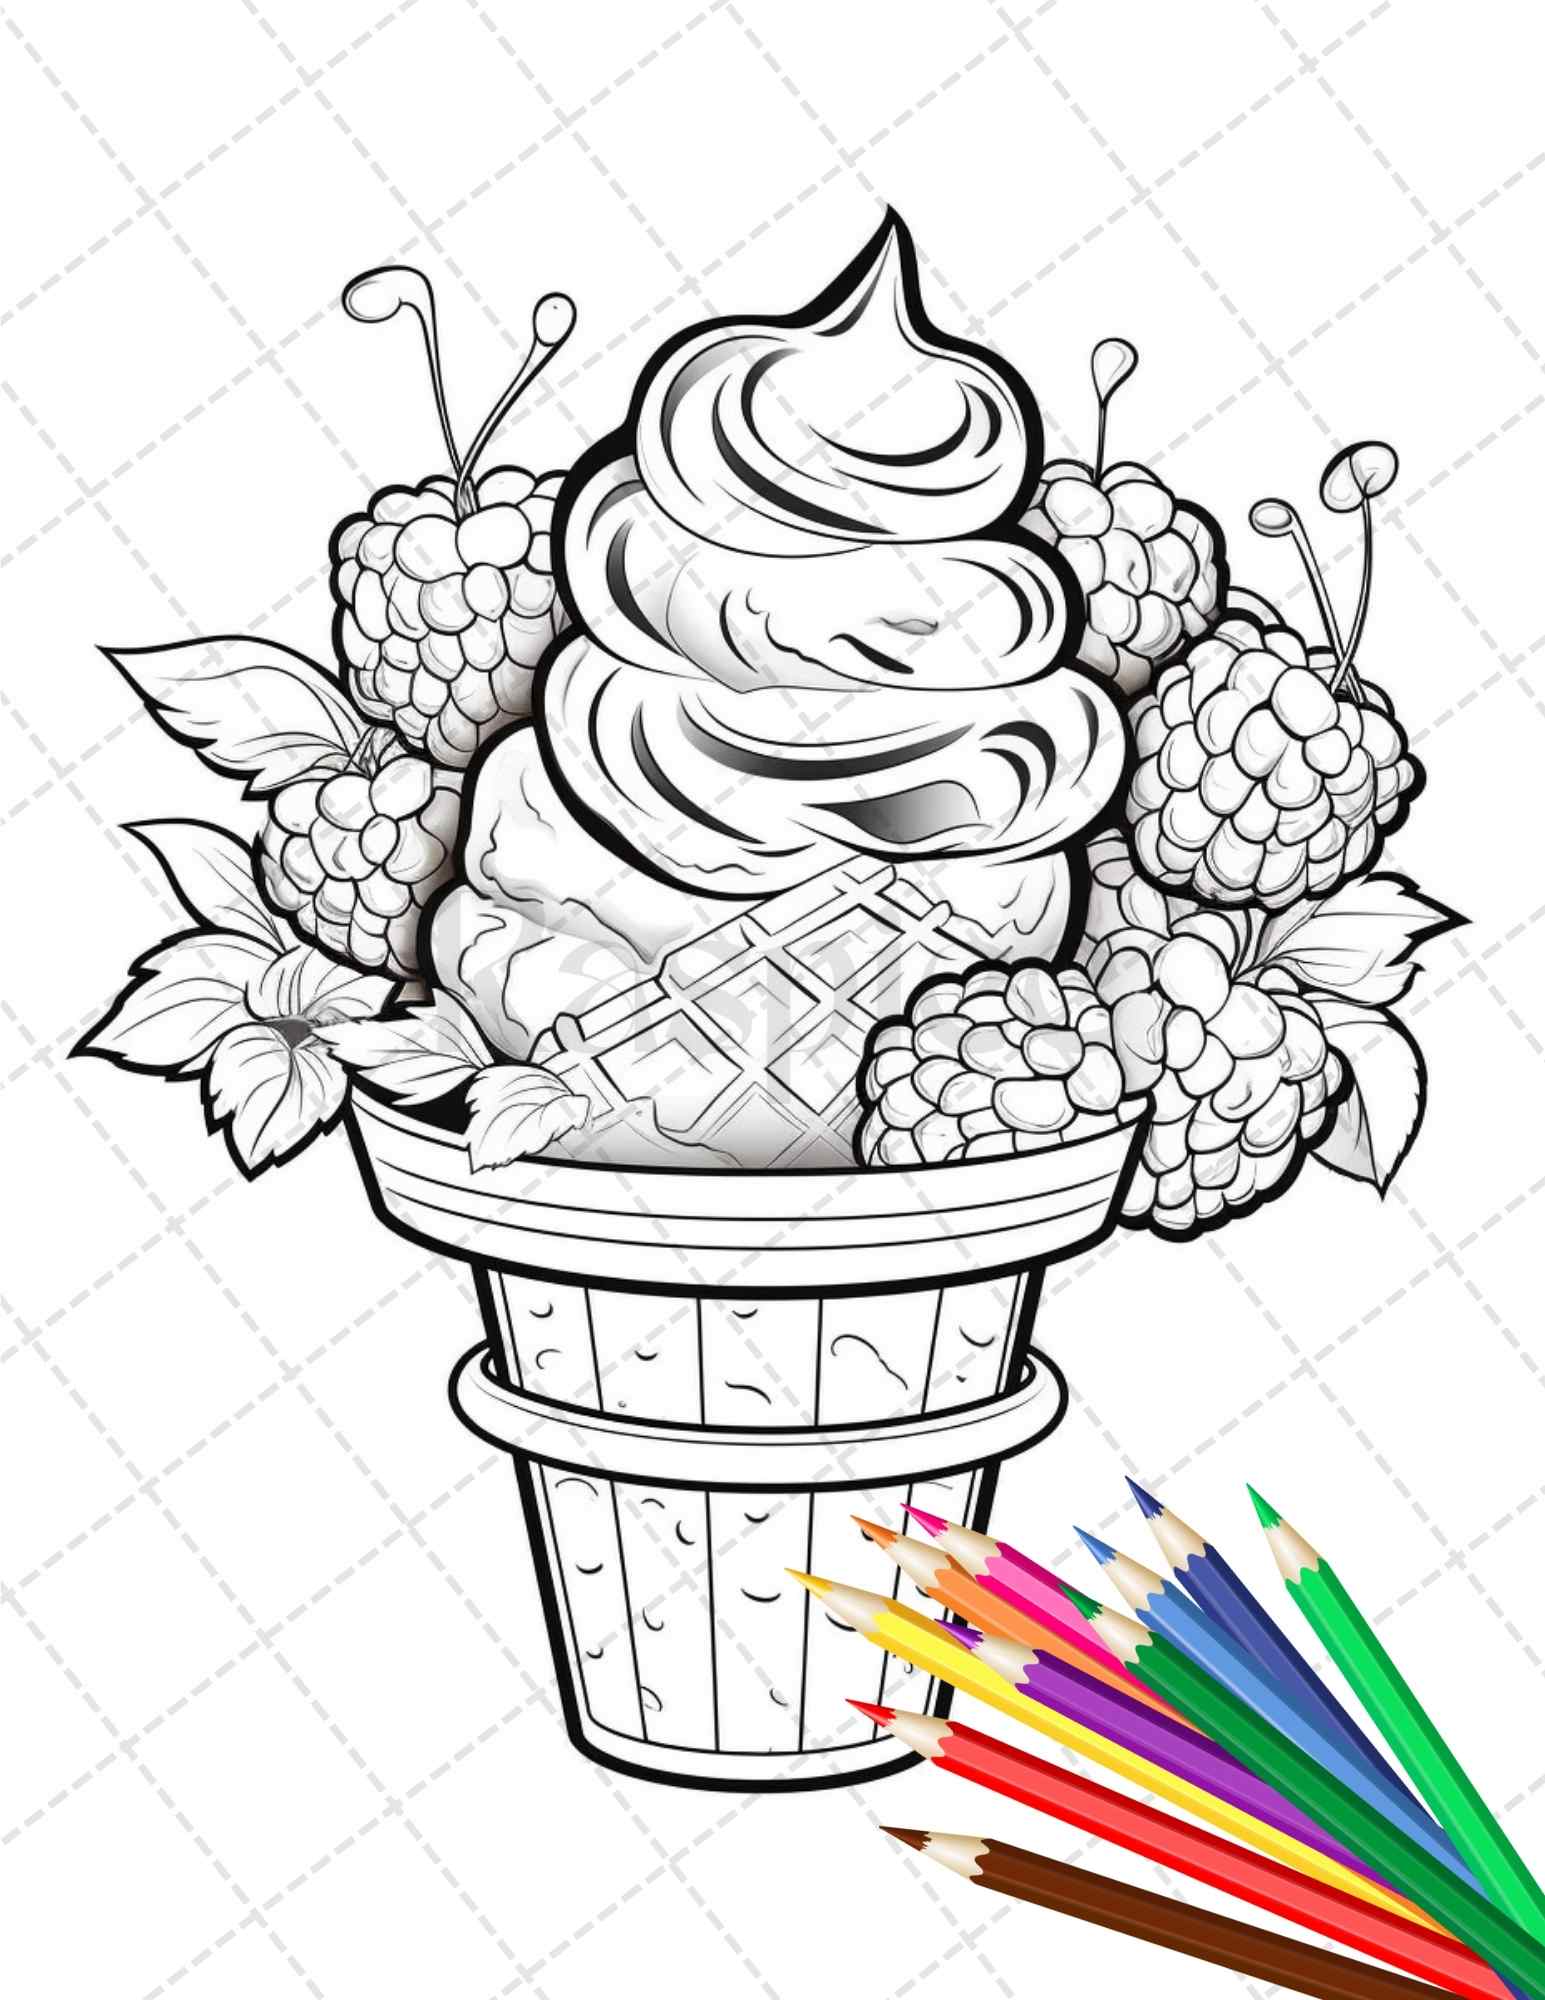 Printable ice cream desserts coloring pages for adults and kids gr â coloring